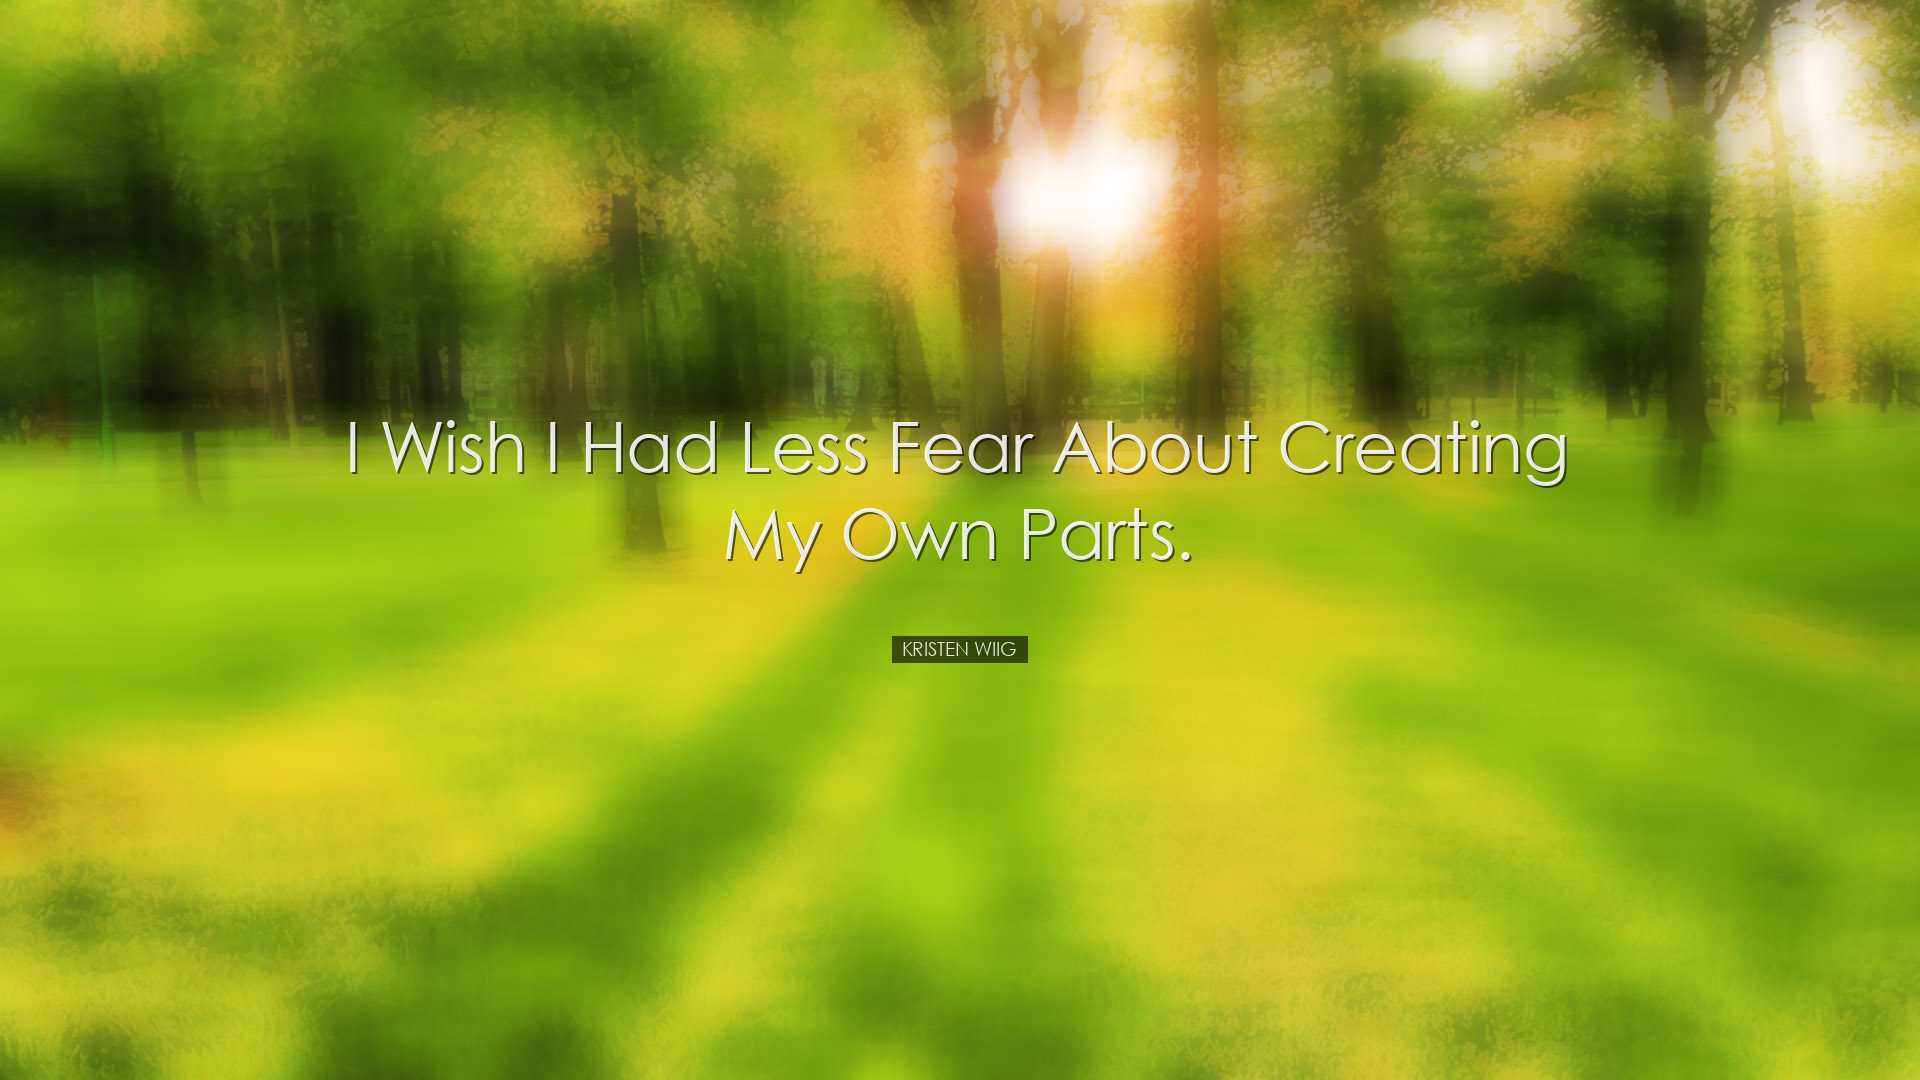 I wish I had less fear about creating my own parts. - Kristen Wiig